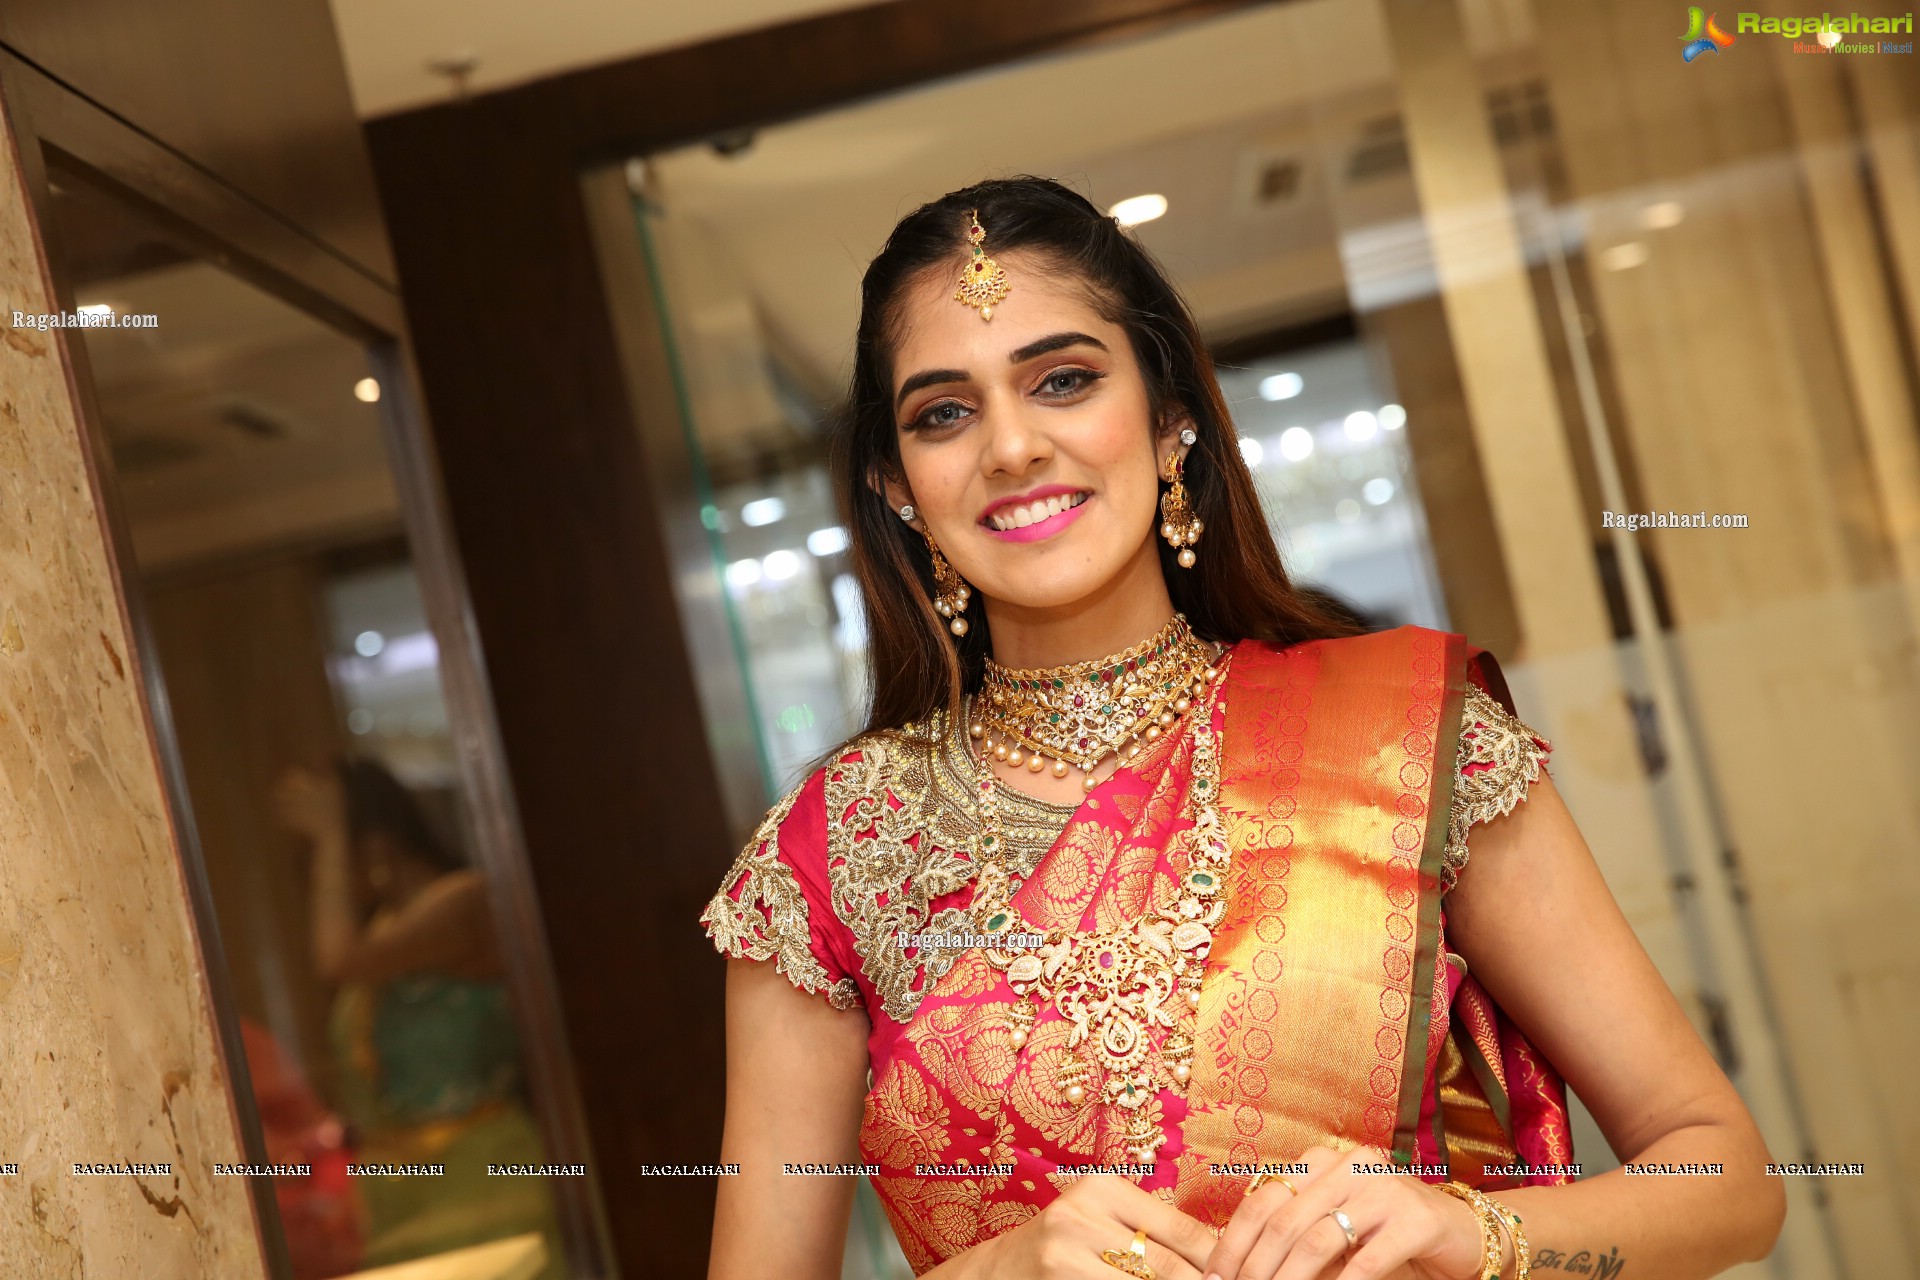 Kritya Sudha Showcases A Design at Manepally Jewellers Dhanteras Festive Collection, HD Gallery